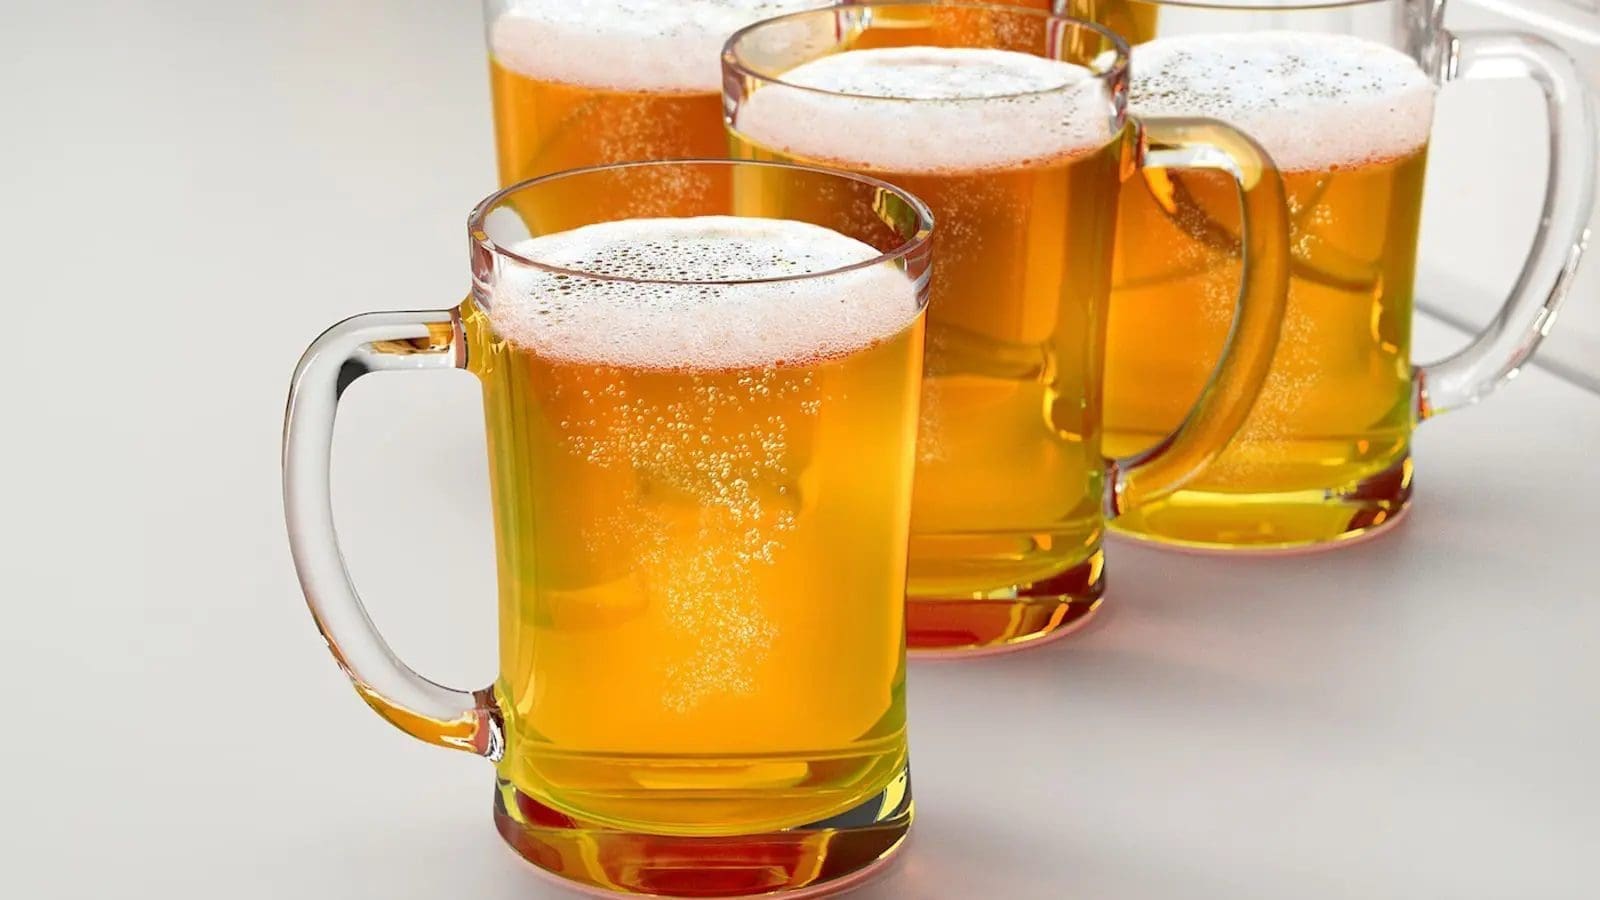 IFF unveils new enzymatic solution to aid brewers stabilize beer more efficiently, sustainably